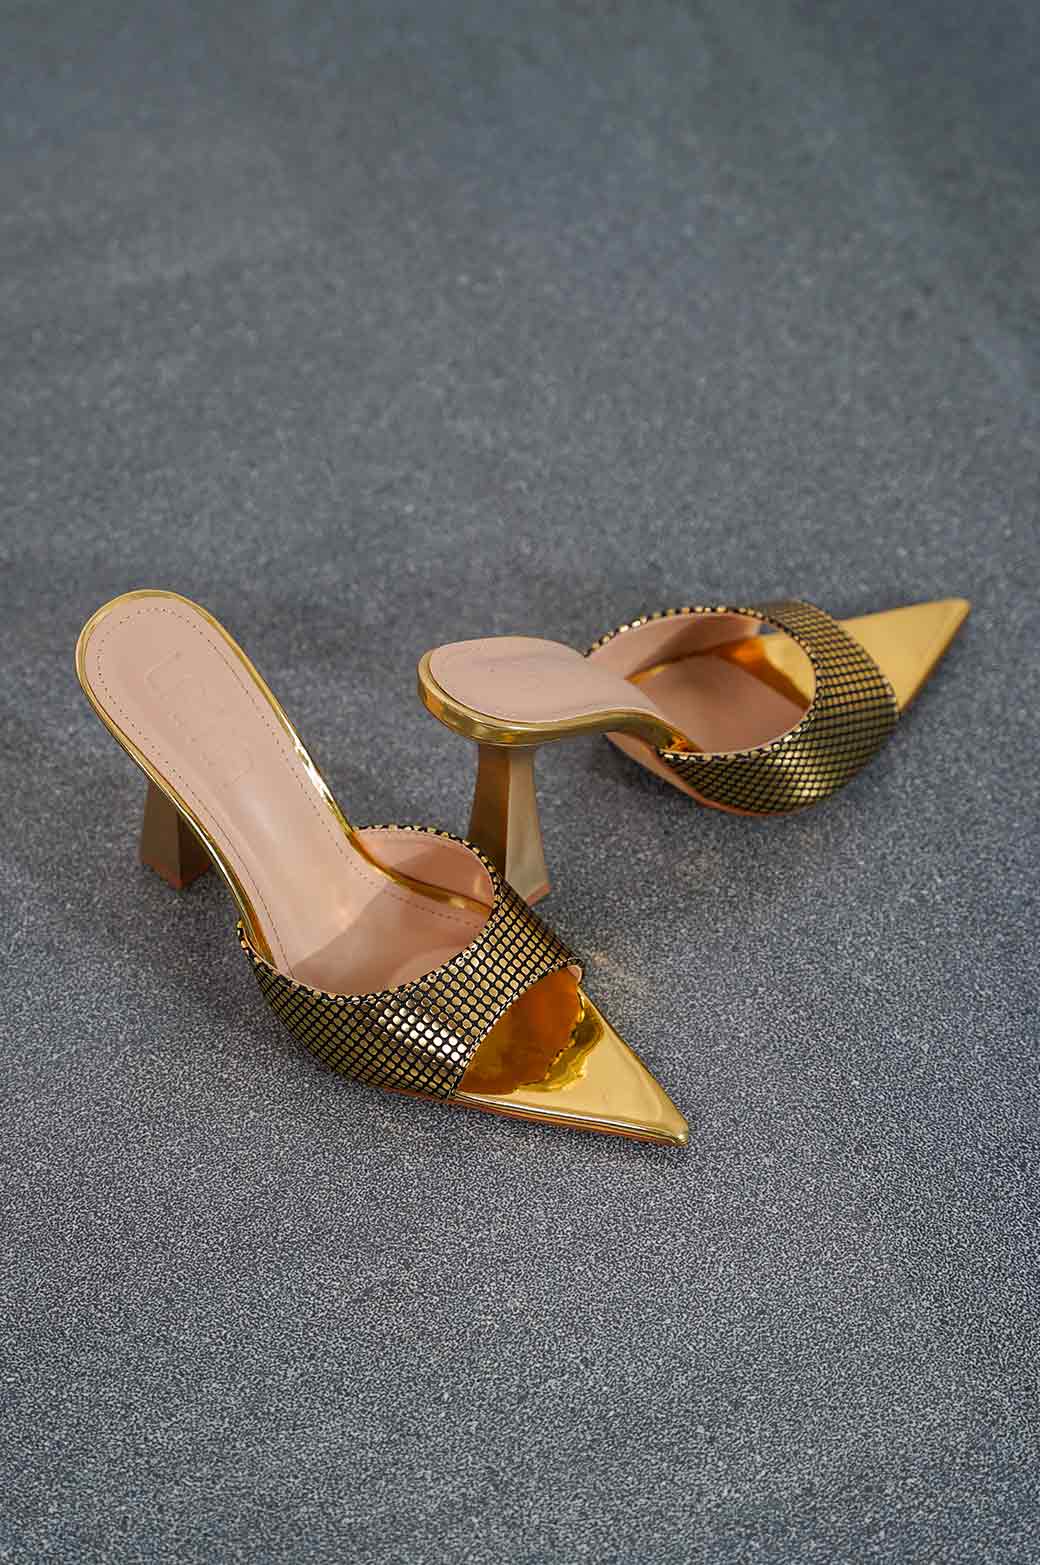 GOLD POINTED GOLD HEEL